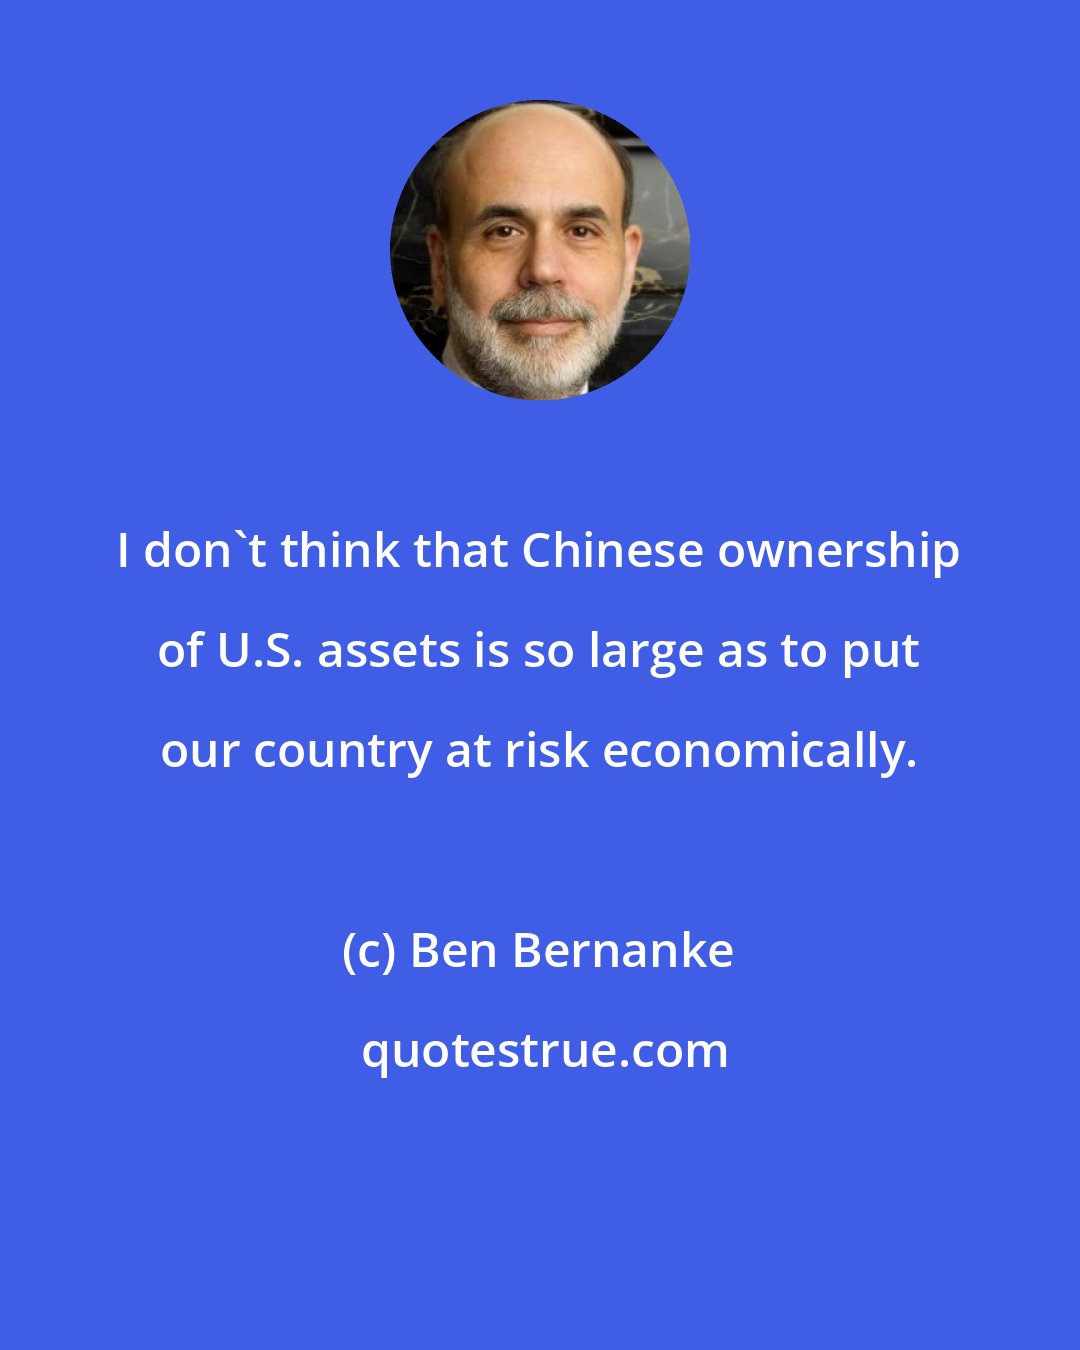 Ben Bernanke: I don't think that Chinese ownership of U.S. assets is so large as to put our country at risk economically.